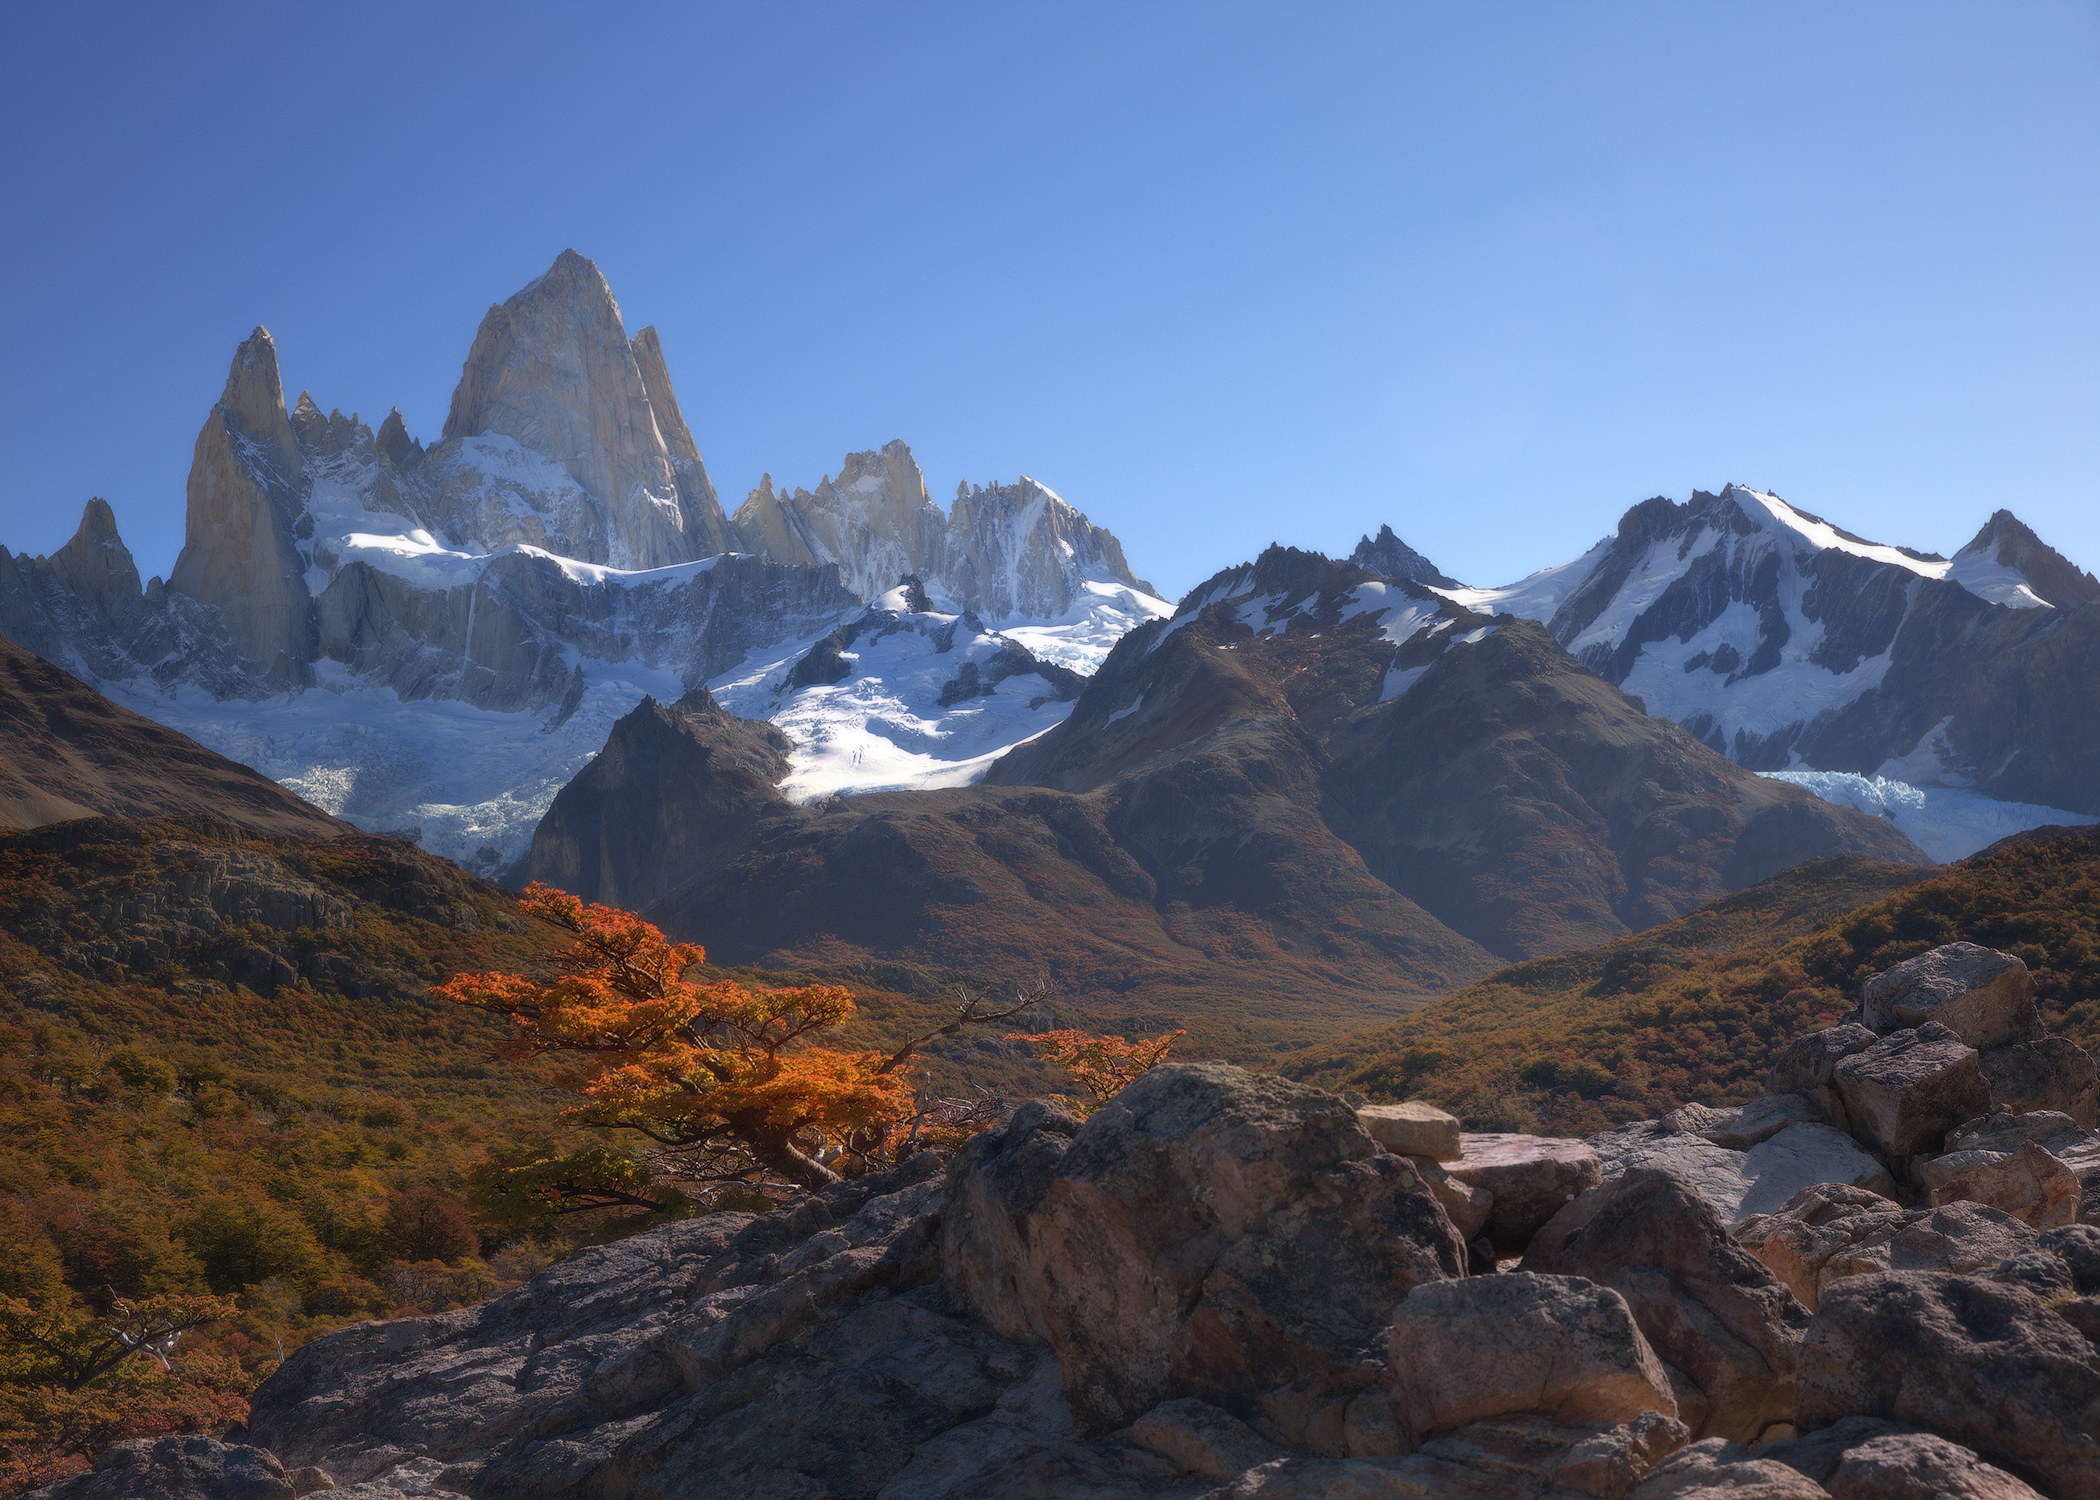 General 2100x1500 Fitz Roy Patagonia Monte Fitz Roy mountains fall snow clear sky nature landscape